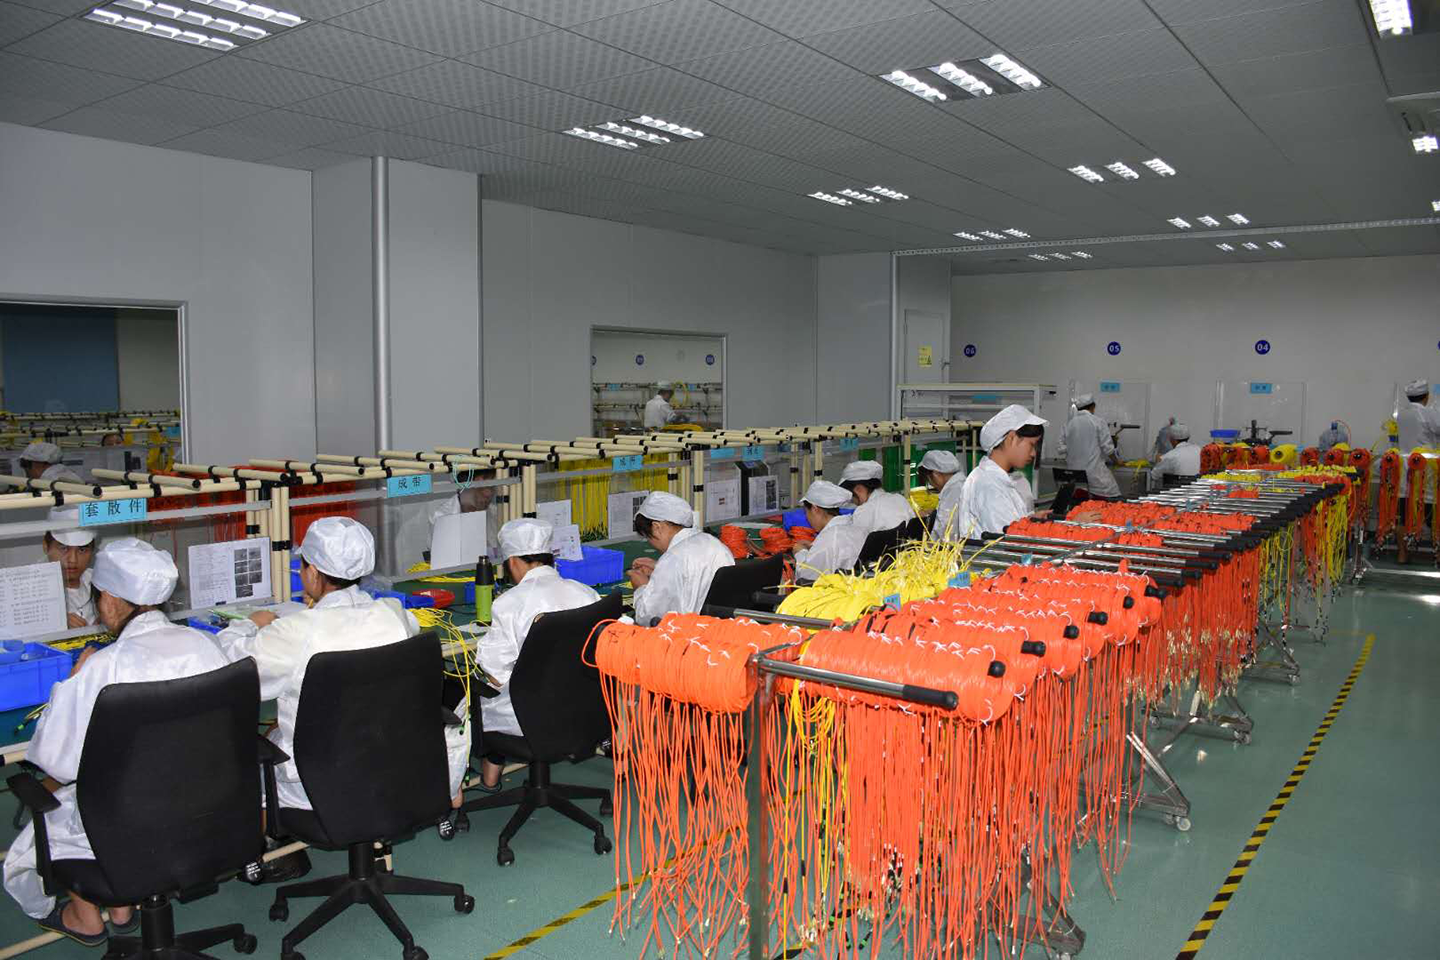 Fiber Hope sc to lc single mode fiber cable supplier communication industry